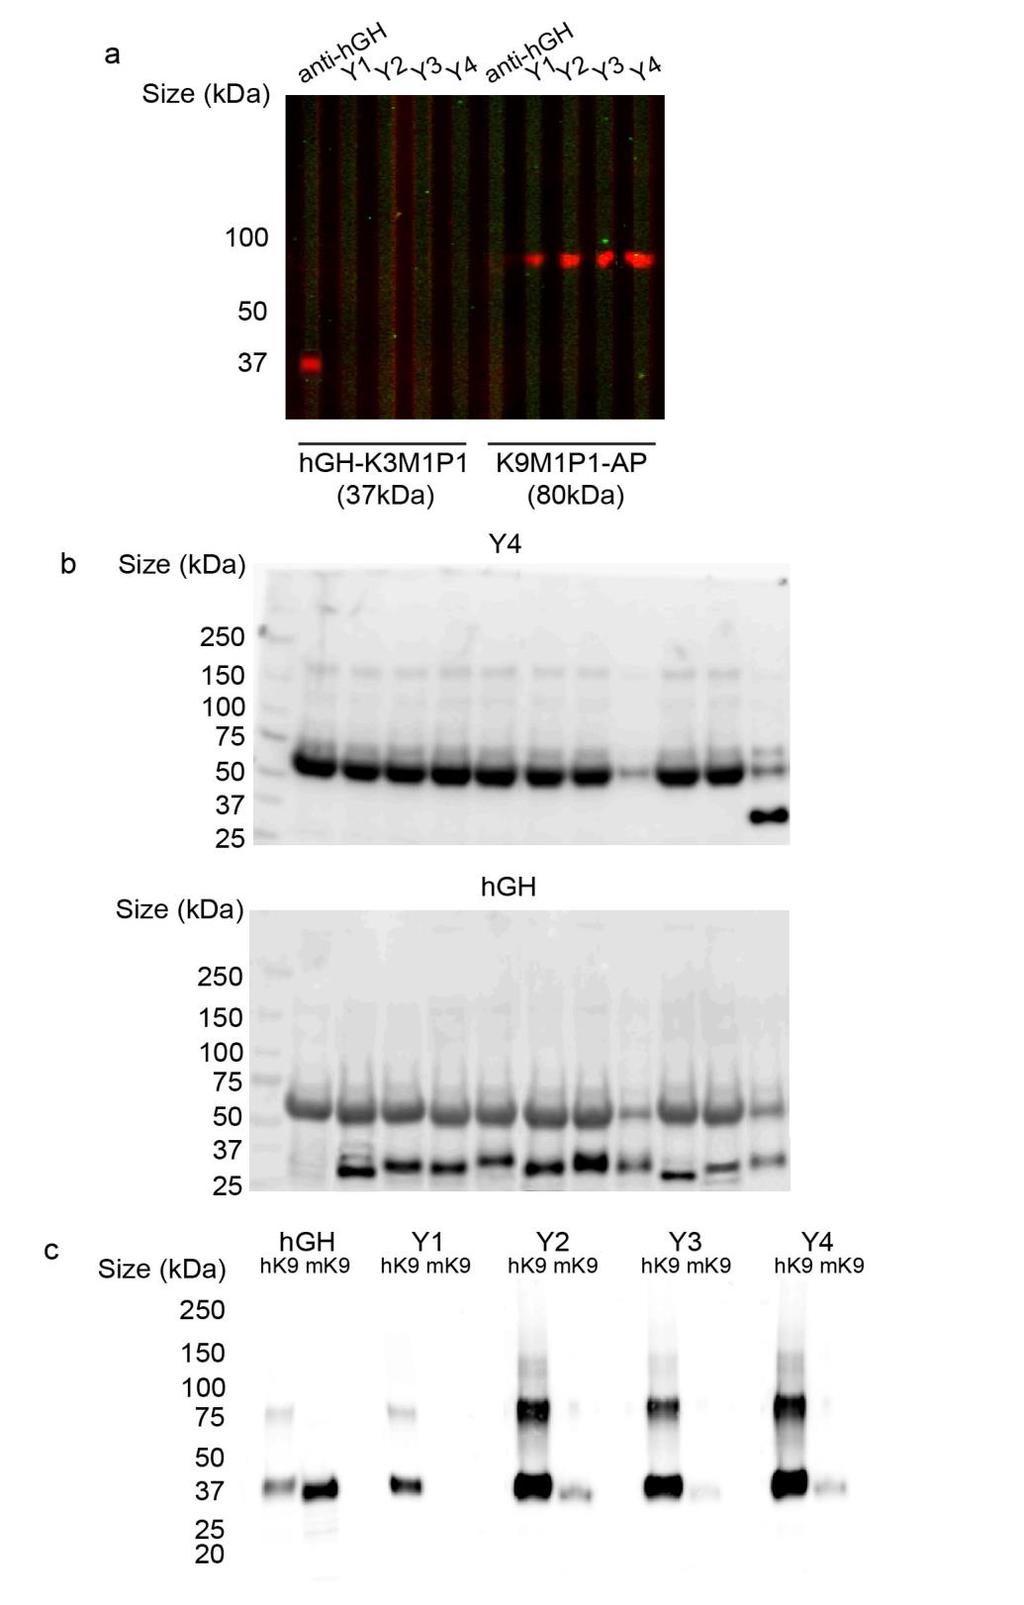 Supplementary Figure 2. Preferential binding of Y-mAbs to hkcnk9 (a) Western blot analysis of Y-mAbs against hgh-hkcnk3 and hkcnk9-alkaline phosphatase recombinant proteins.